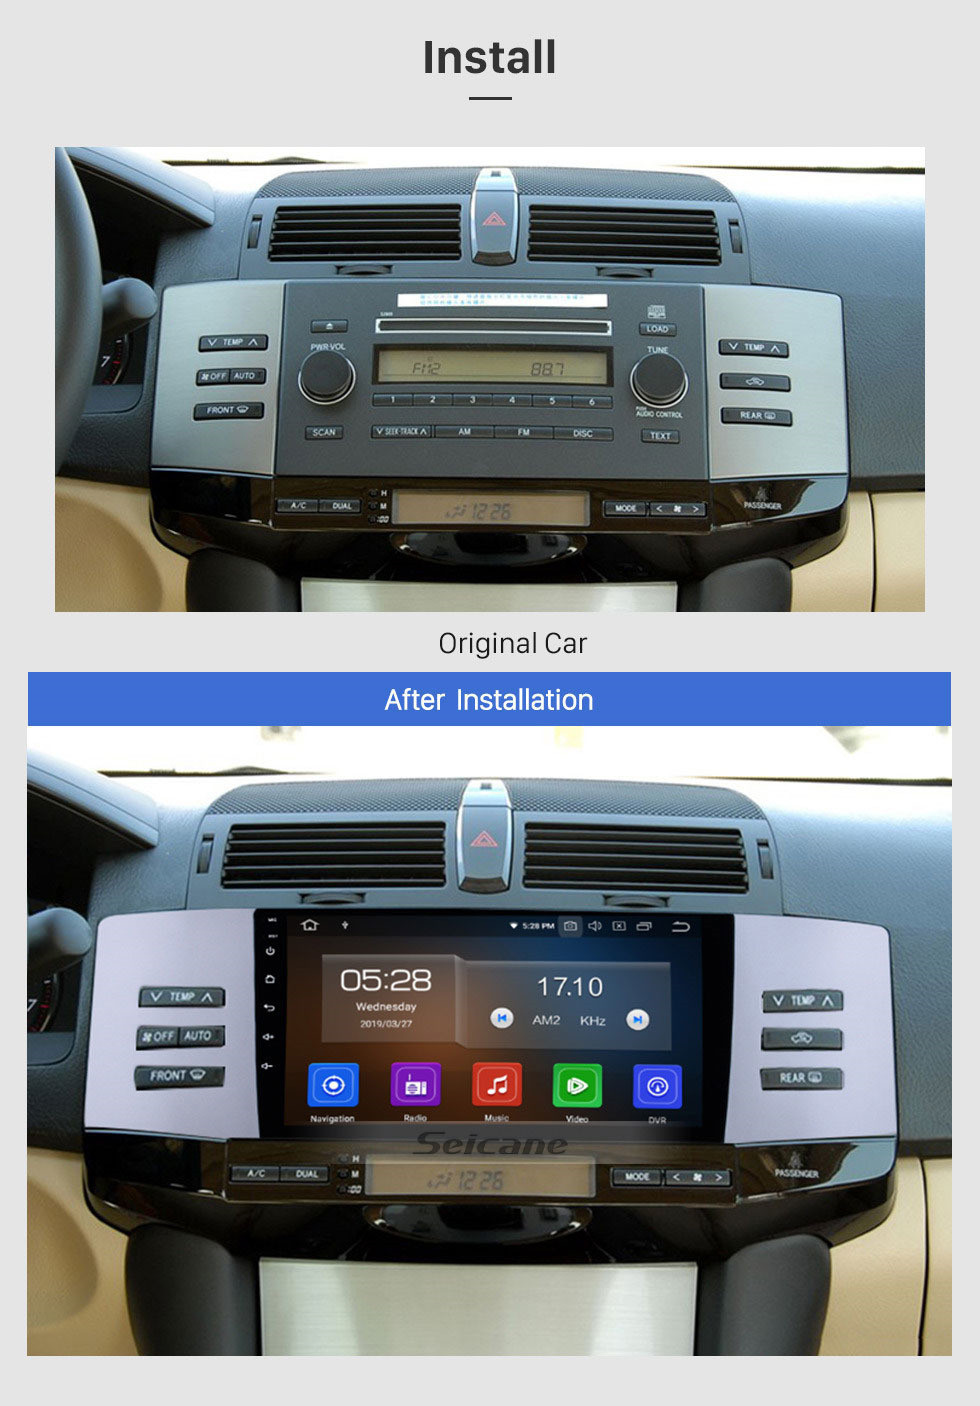 Seicane 9 inch Android 11.0 HD Touchscreen Radio GPS Navigation system For 2005 2006 2007 2008 2009 Toyota Old Reiz Bluetooth Support OBD2 USB WIFI DVR Mirror Link Carplay